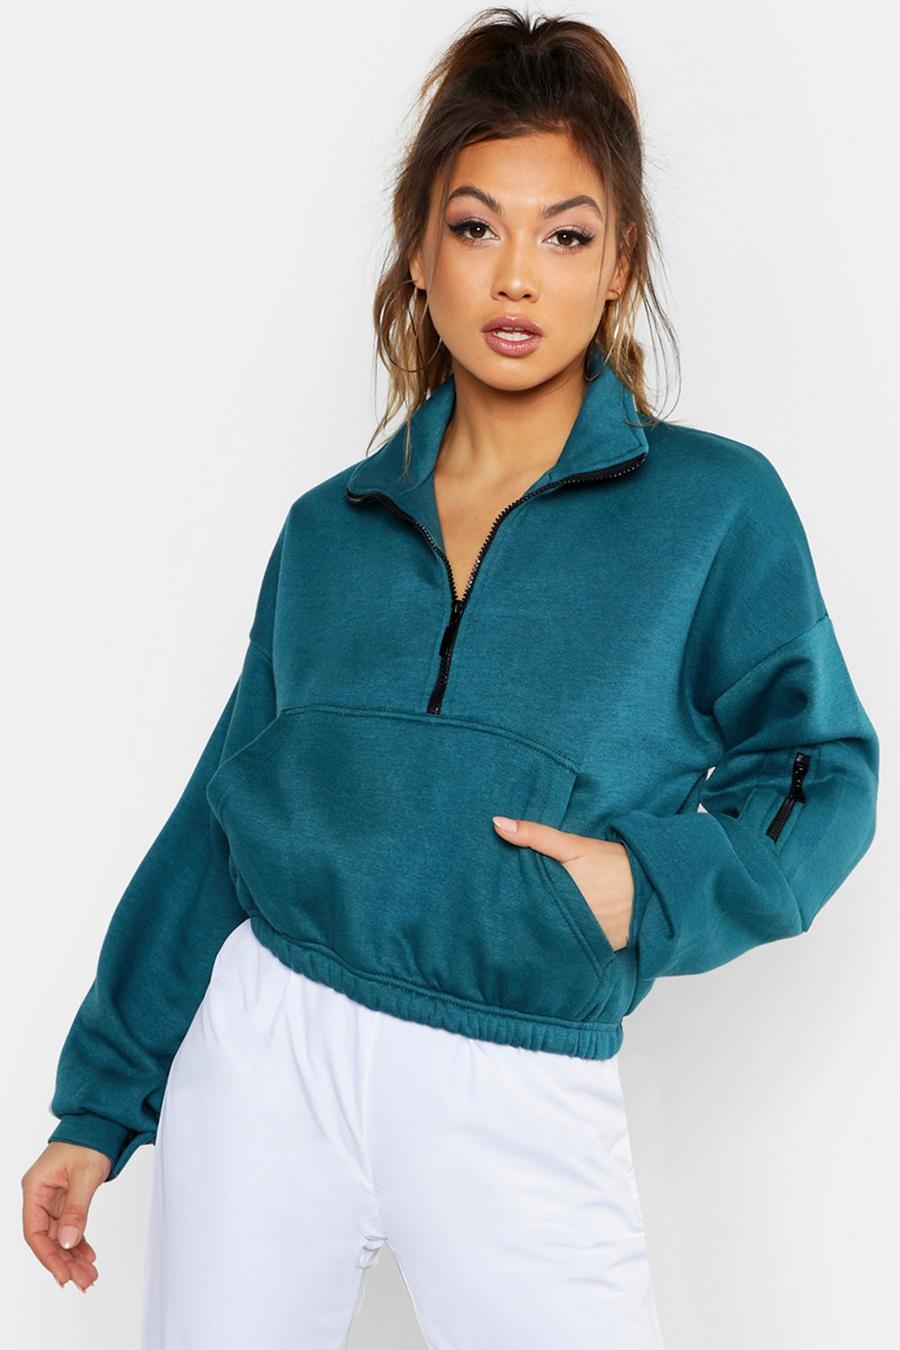 Teal Zip Front Oversized High Neck Sweater image number 1